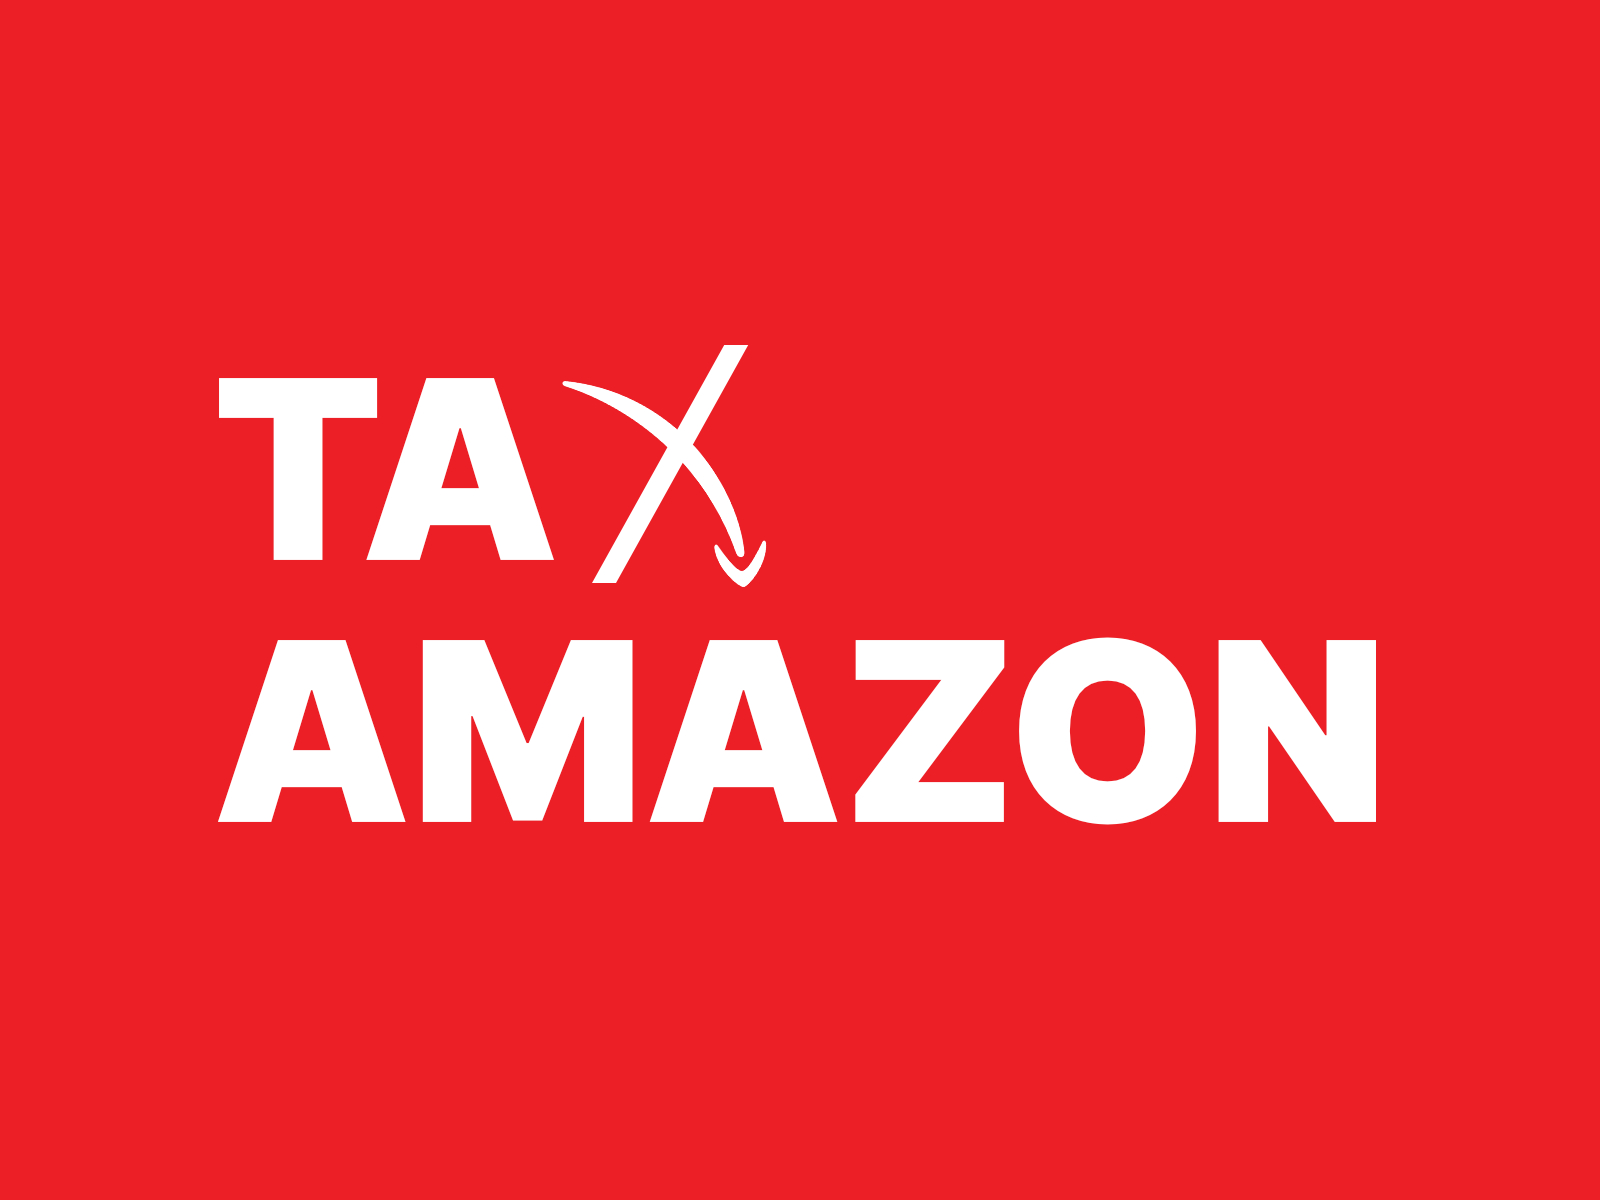 Tax Amazon logo, playing off the imagery of Amazon's "smile" into a frown